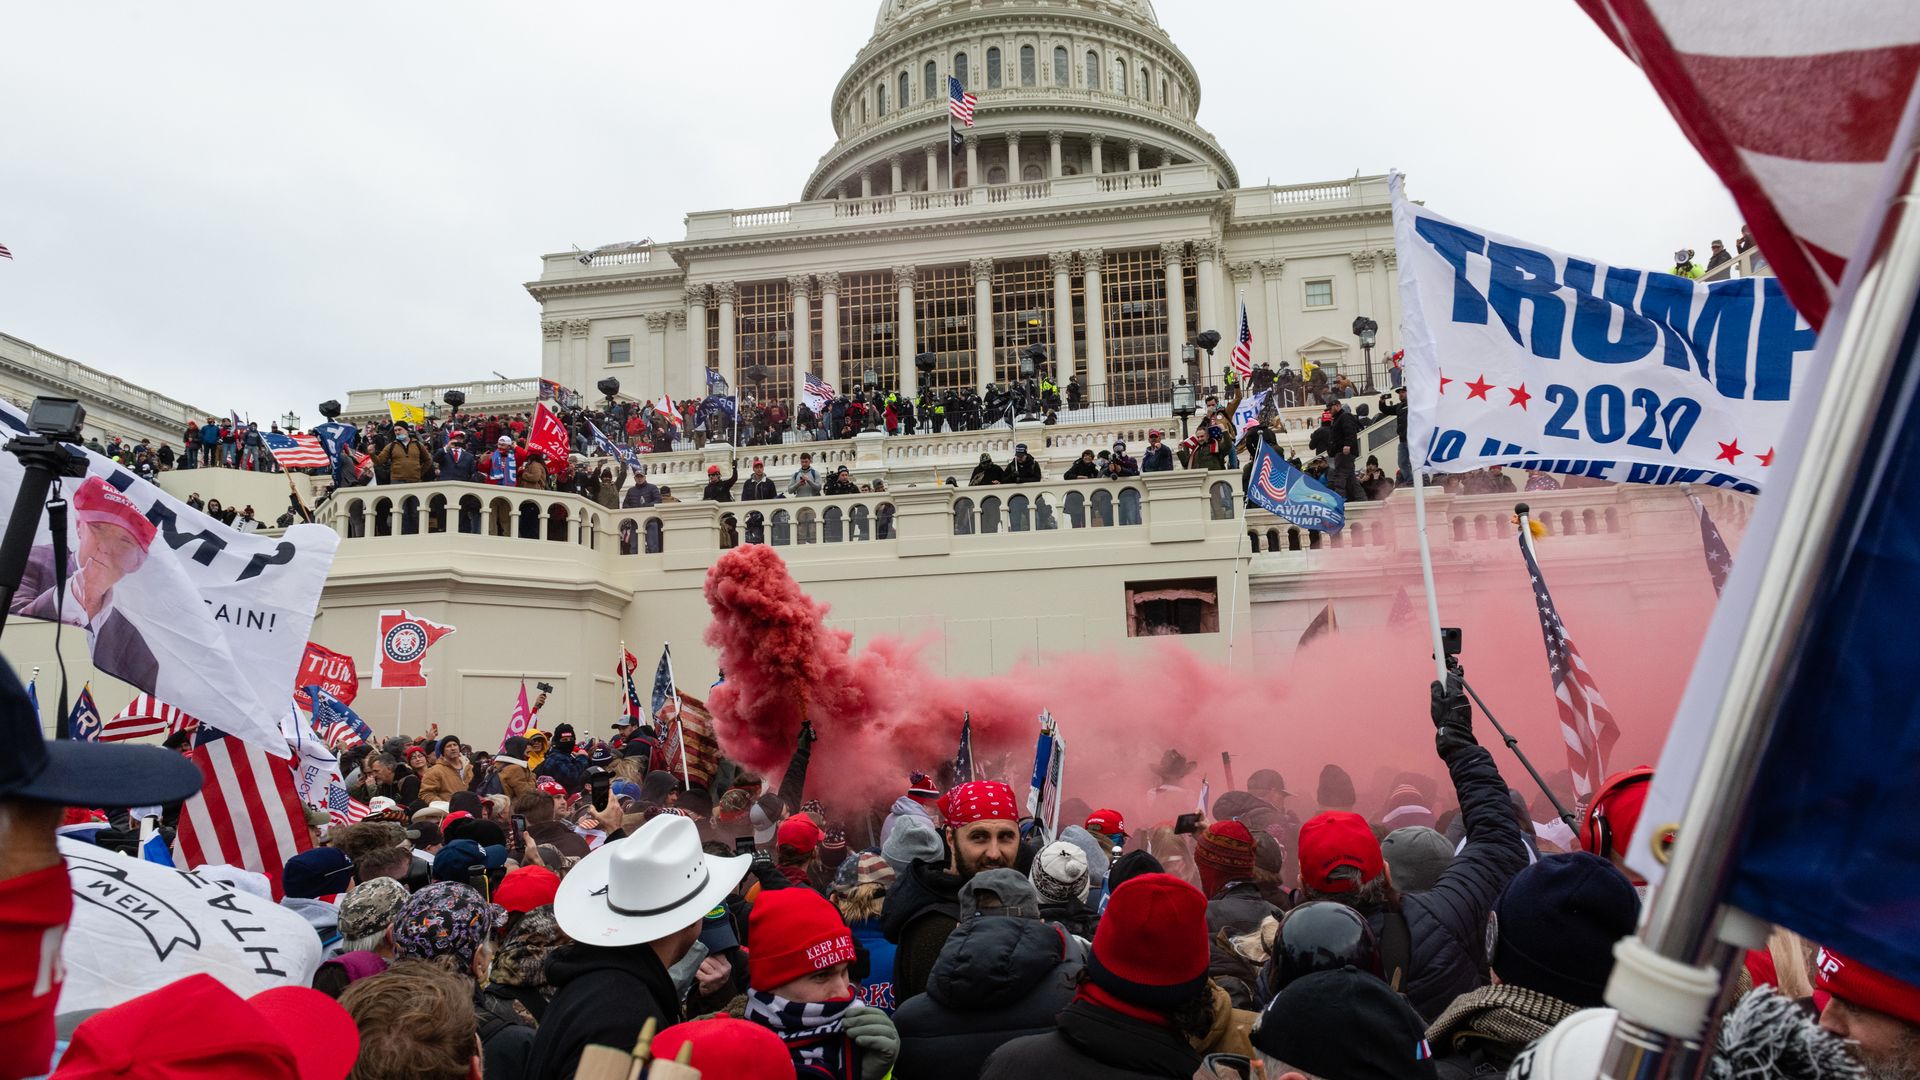 Pro-Trump rioters at the U.S. Capitol building on Jan. 6, 2021.